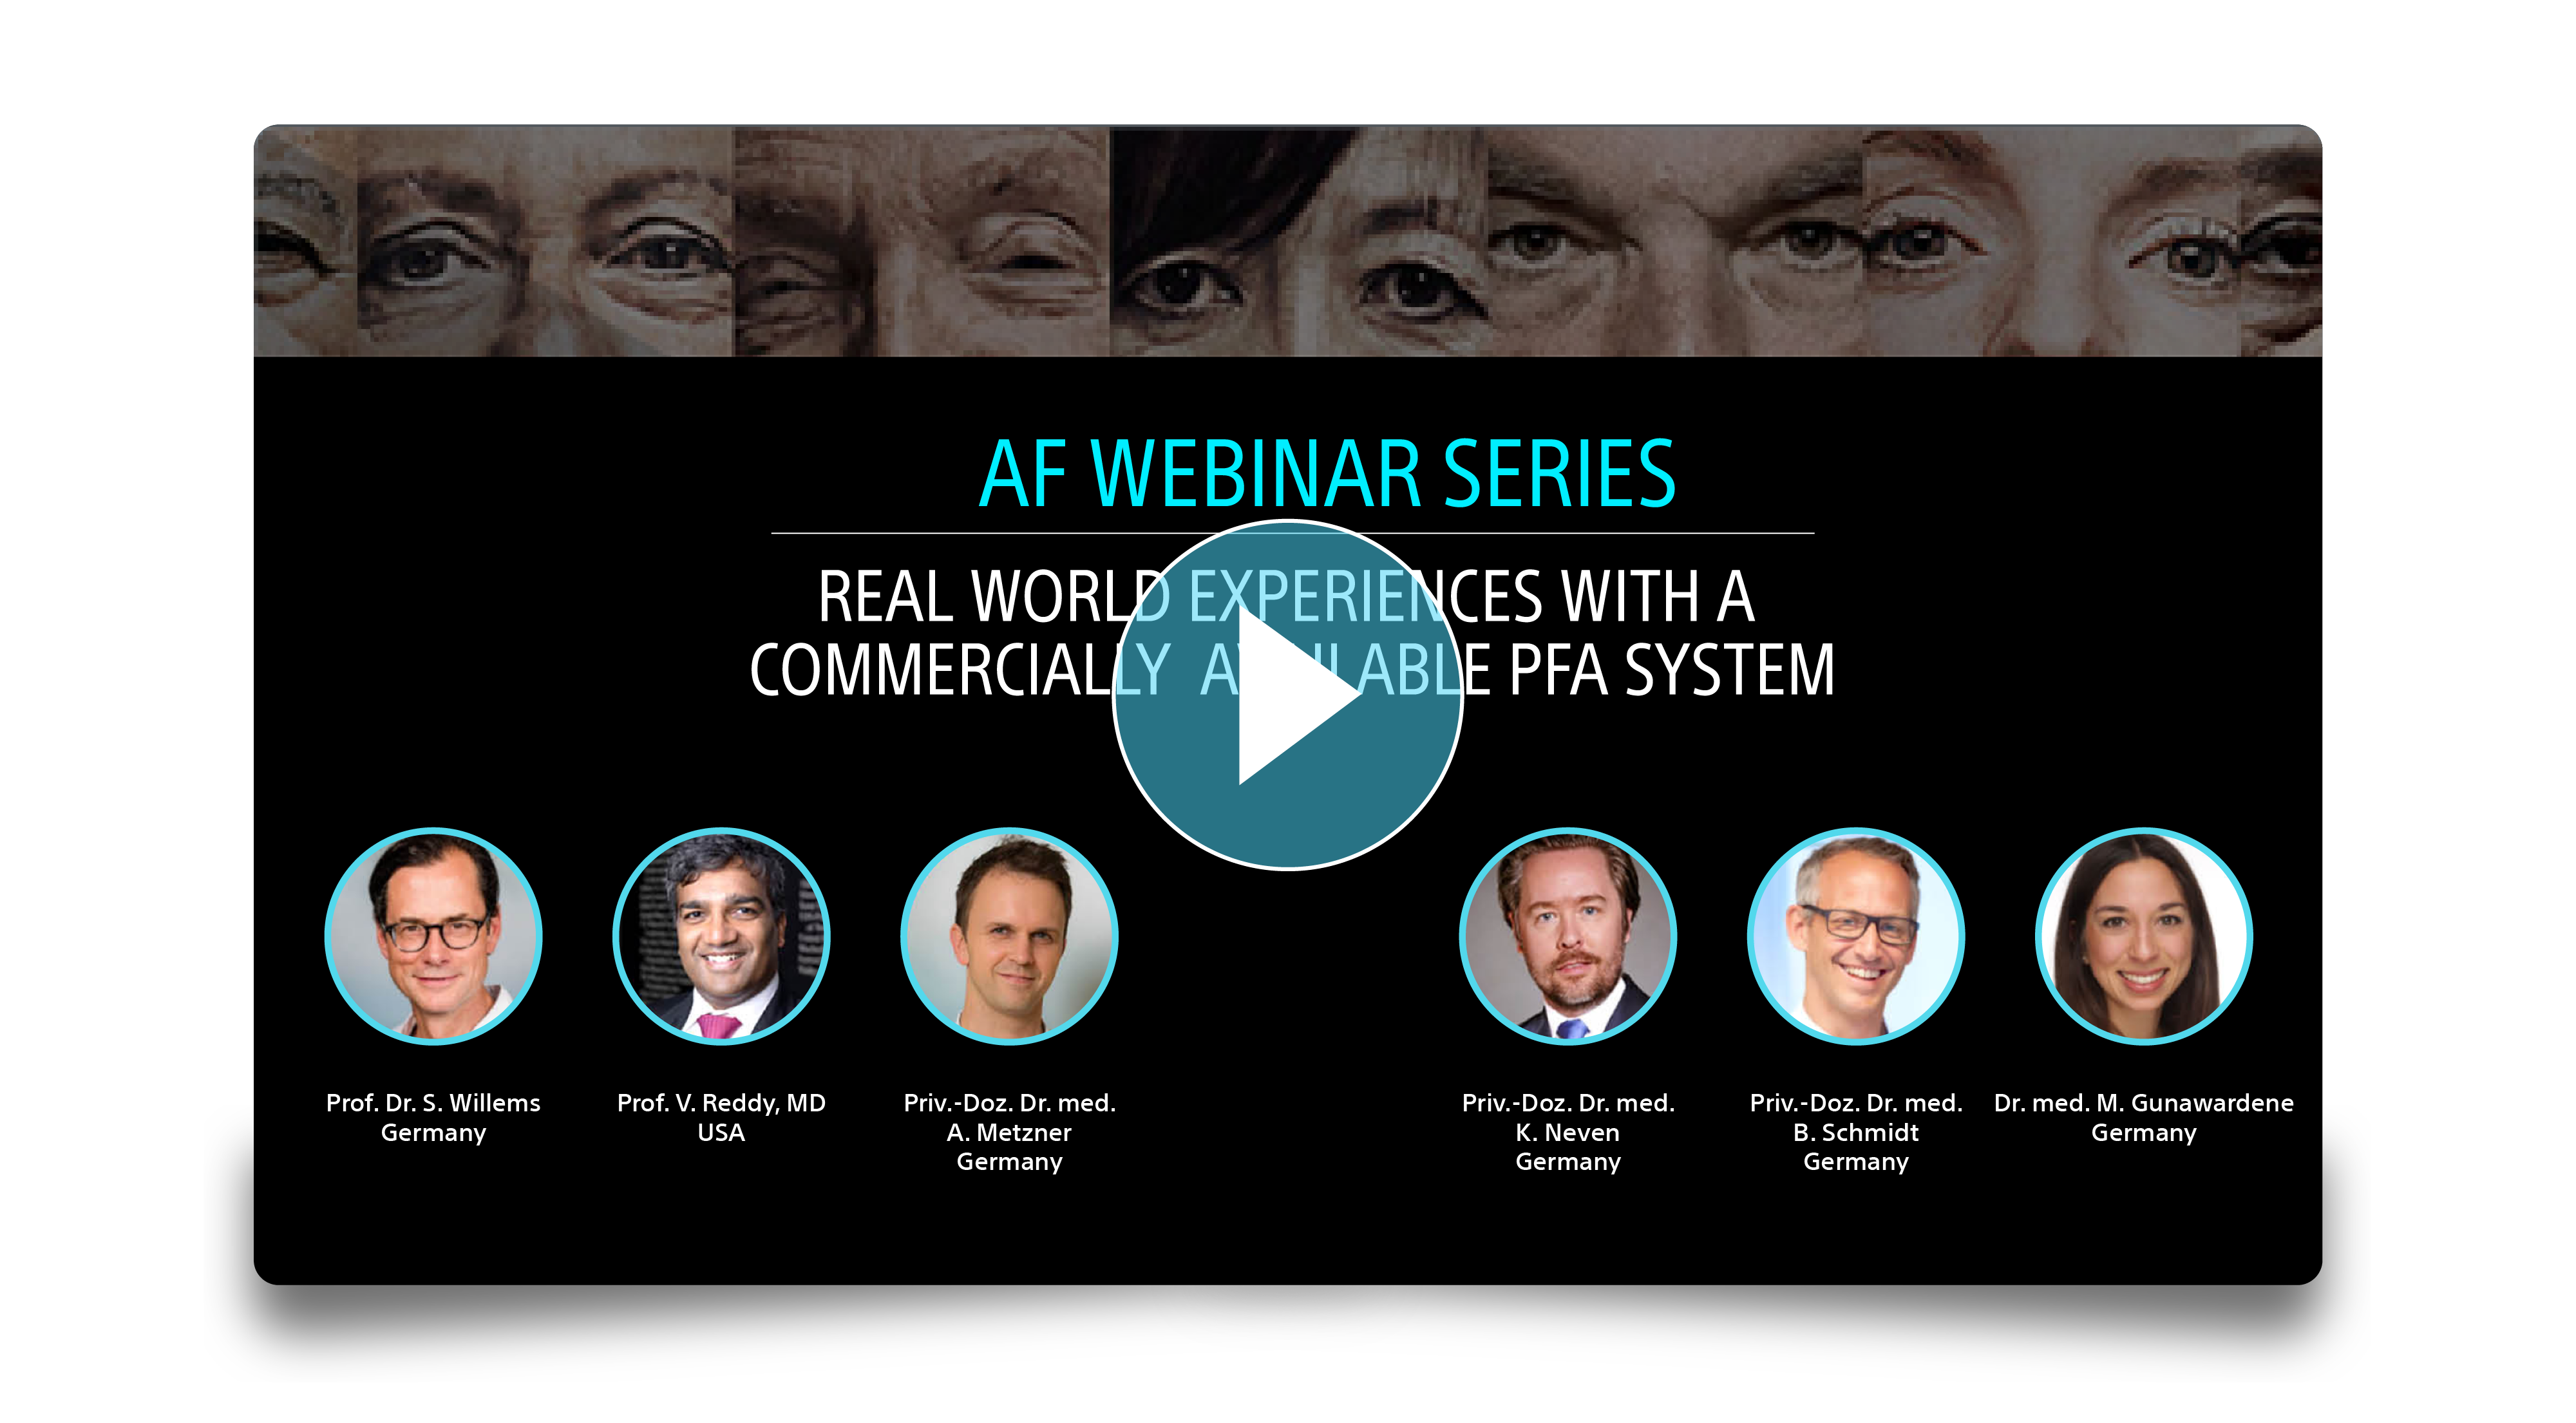 REAL WORLD EXPERIENCES WITH A COMMERCIALLY AVAILABLE PFA SYSTEM